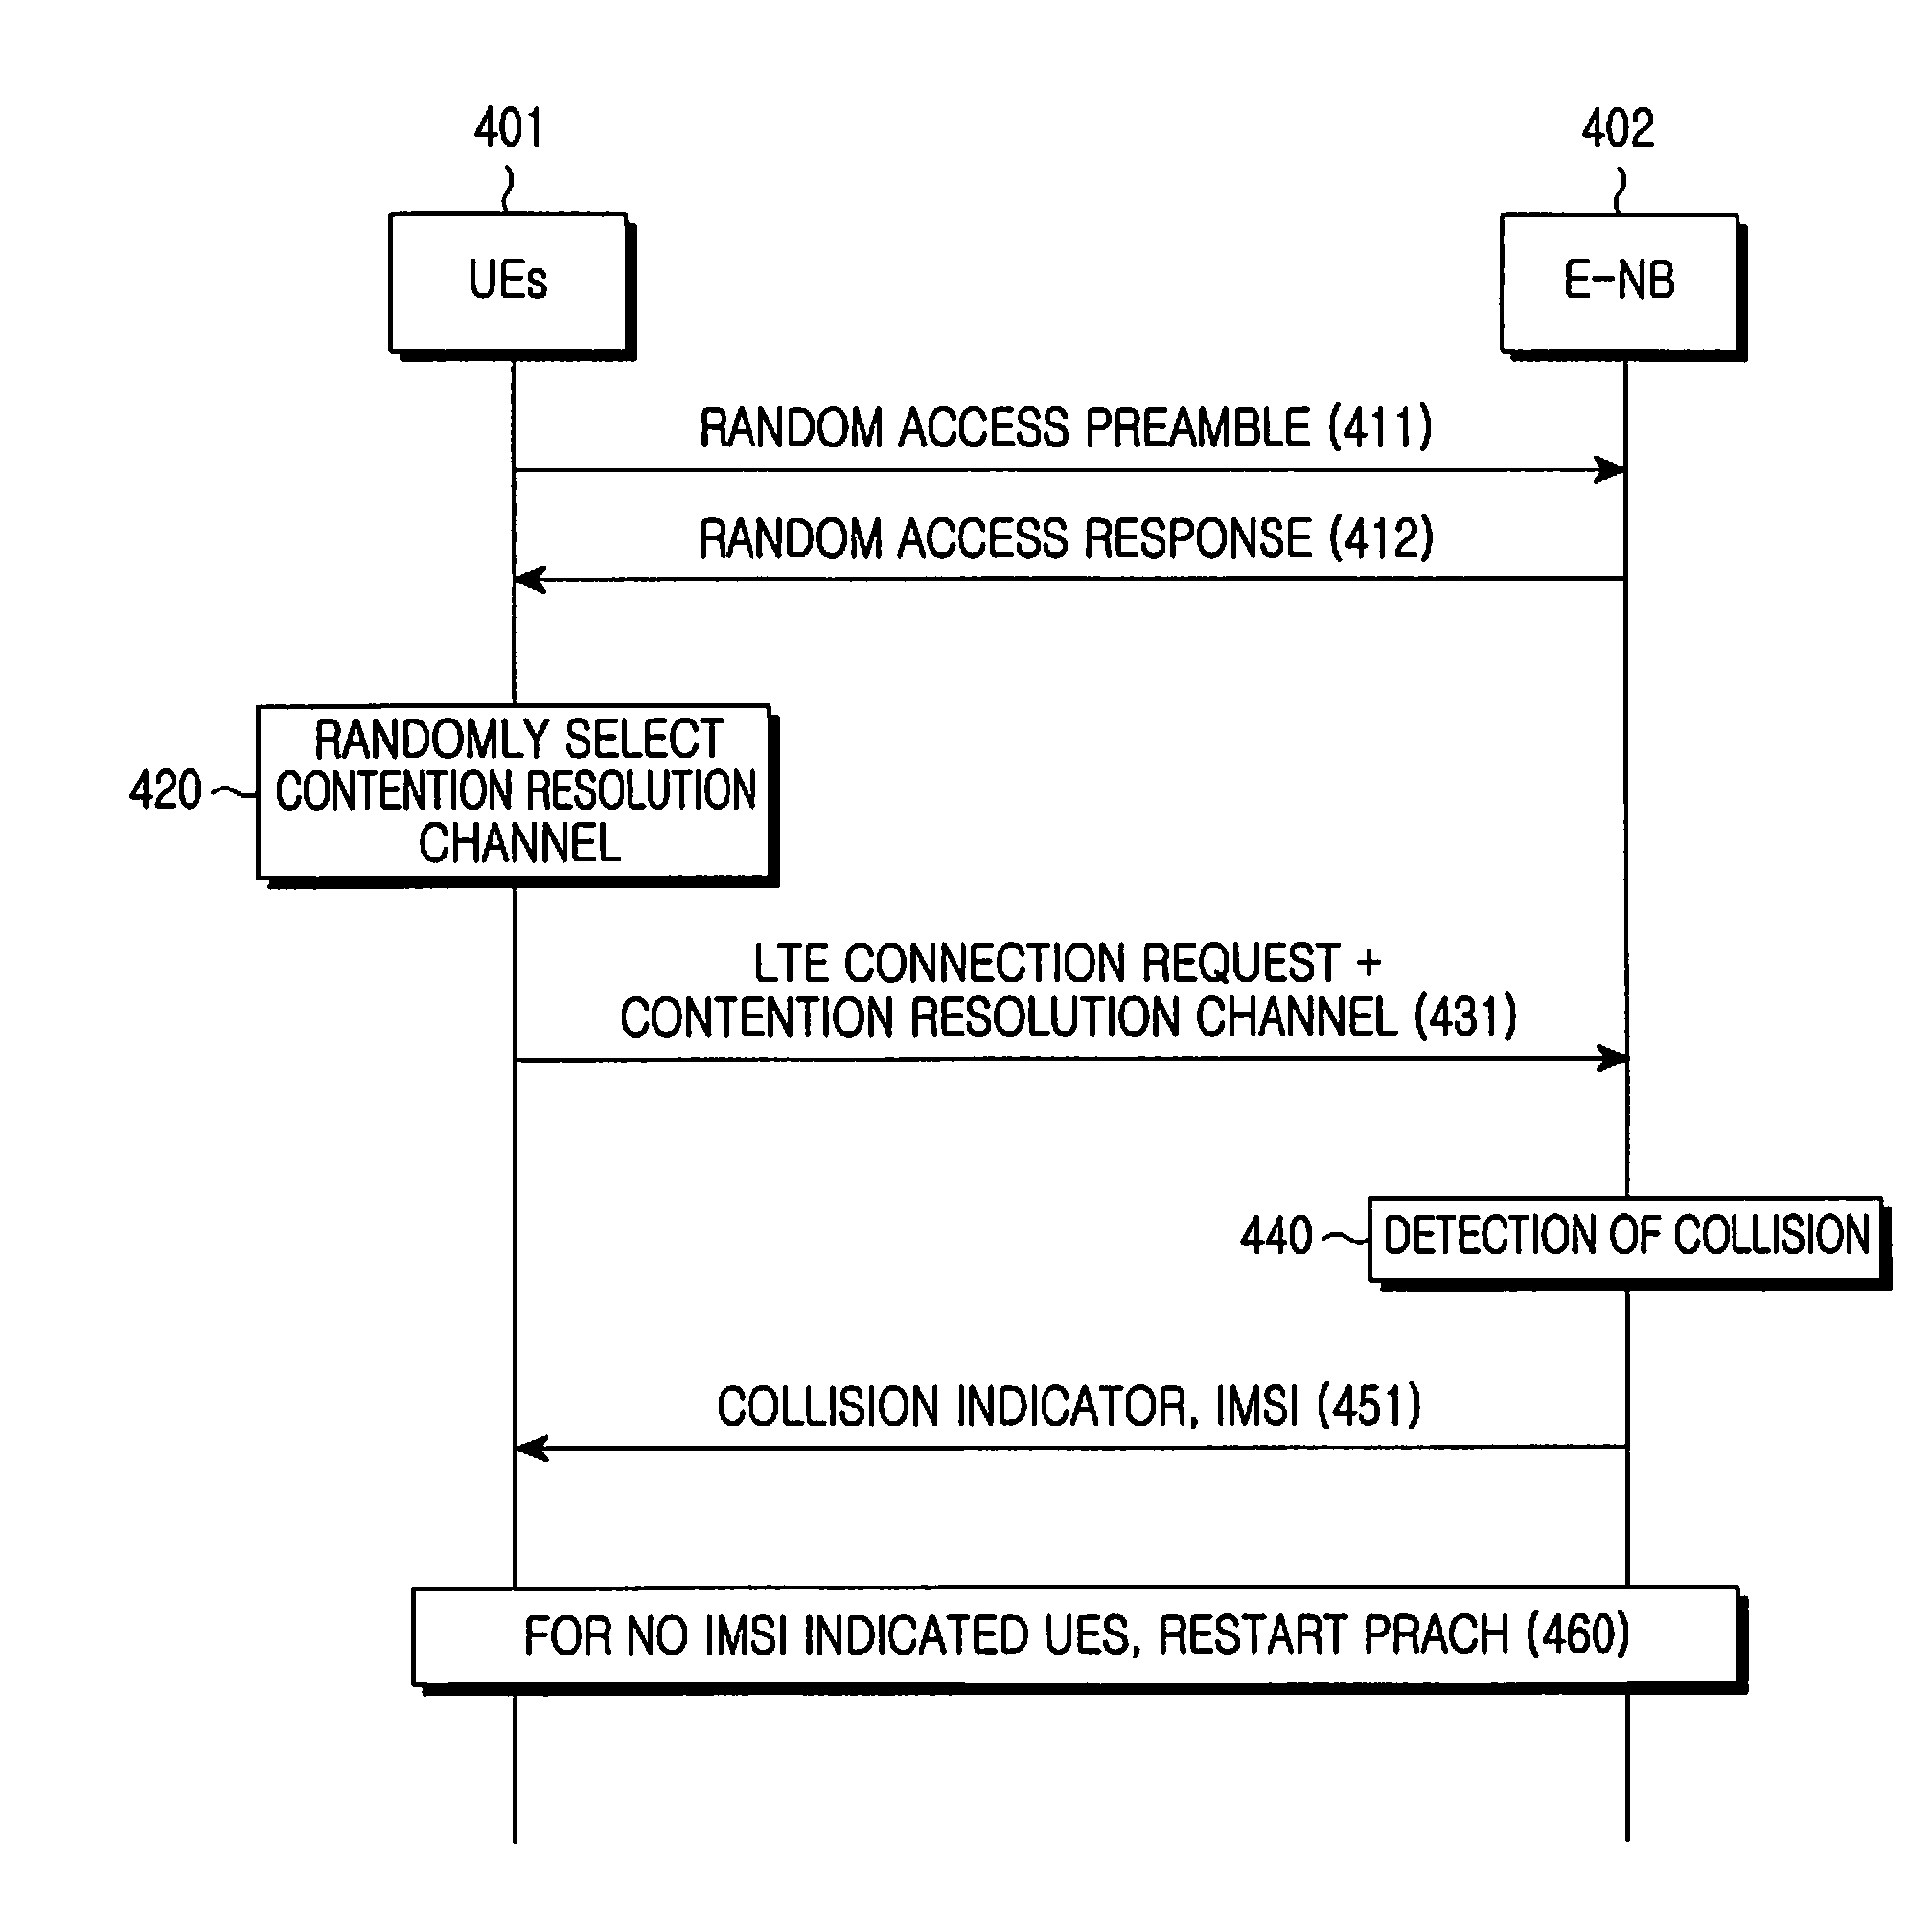 Method and apparatus for transmitting/receiving rach